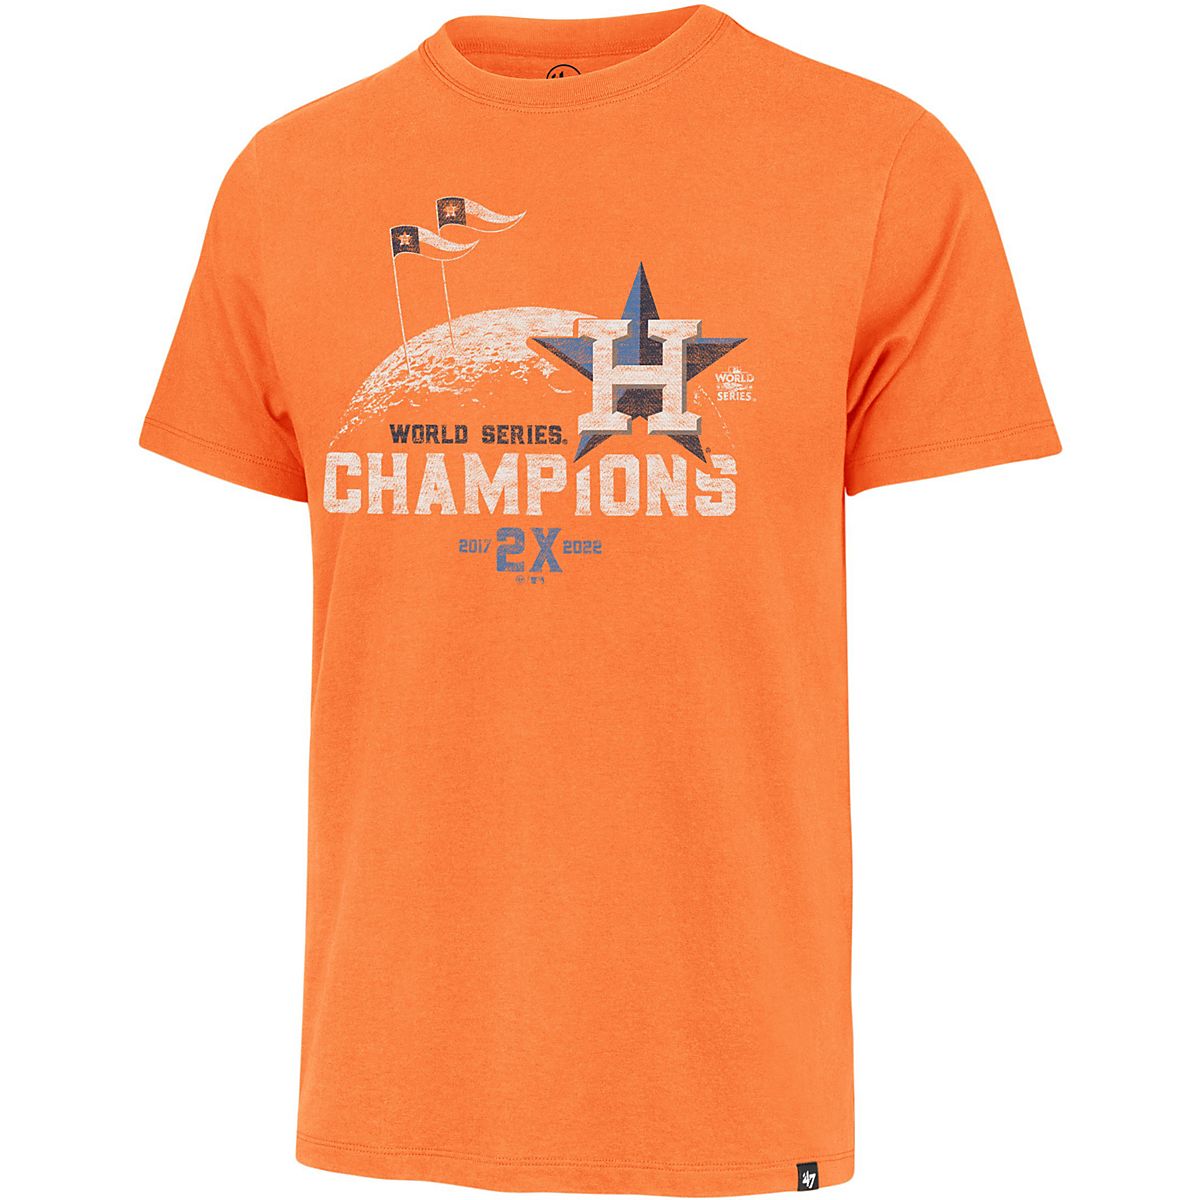 Houston Astros 2022 World Series Championship gear, get yours now